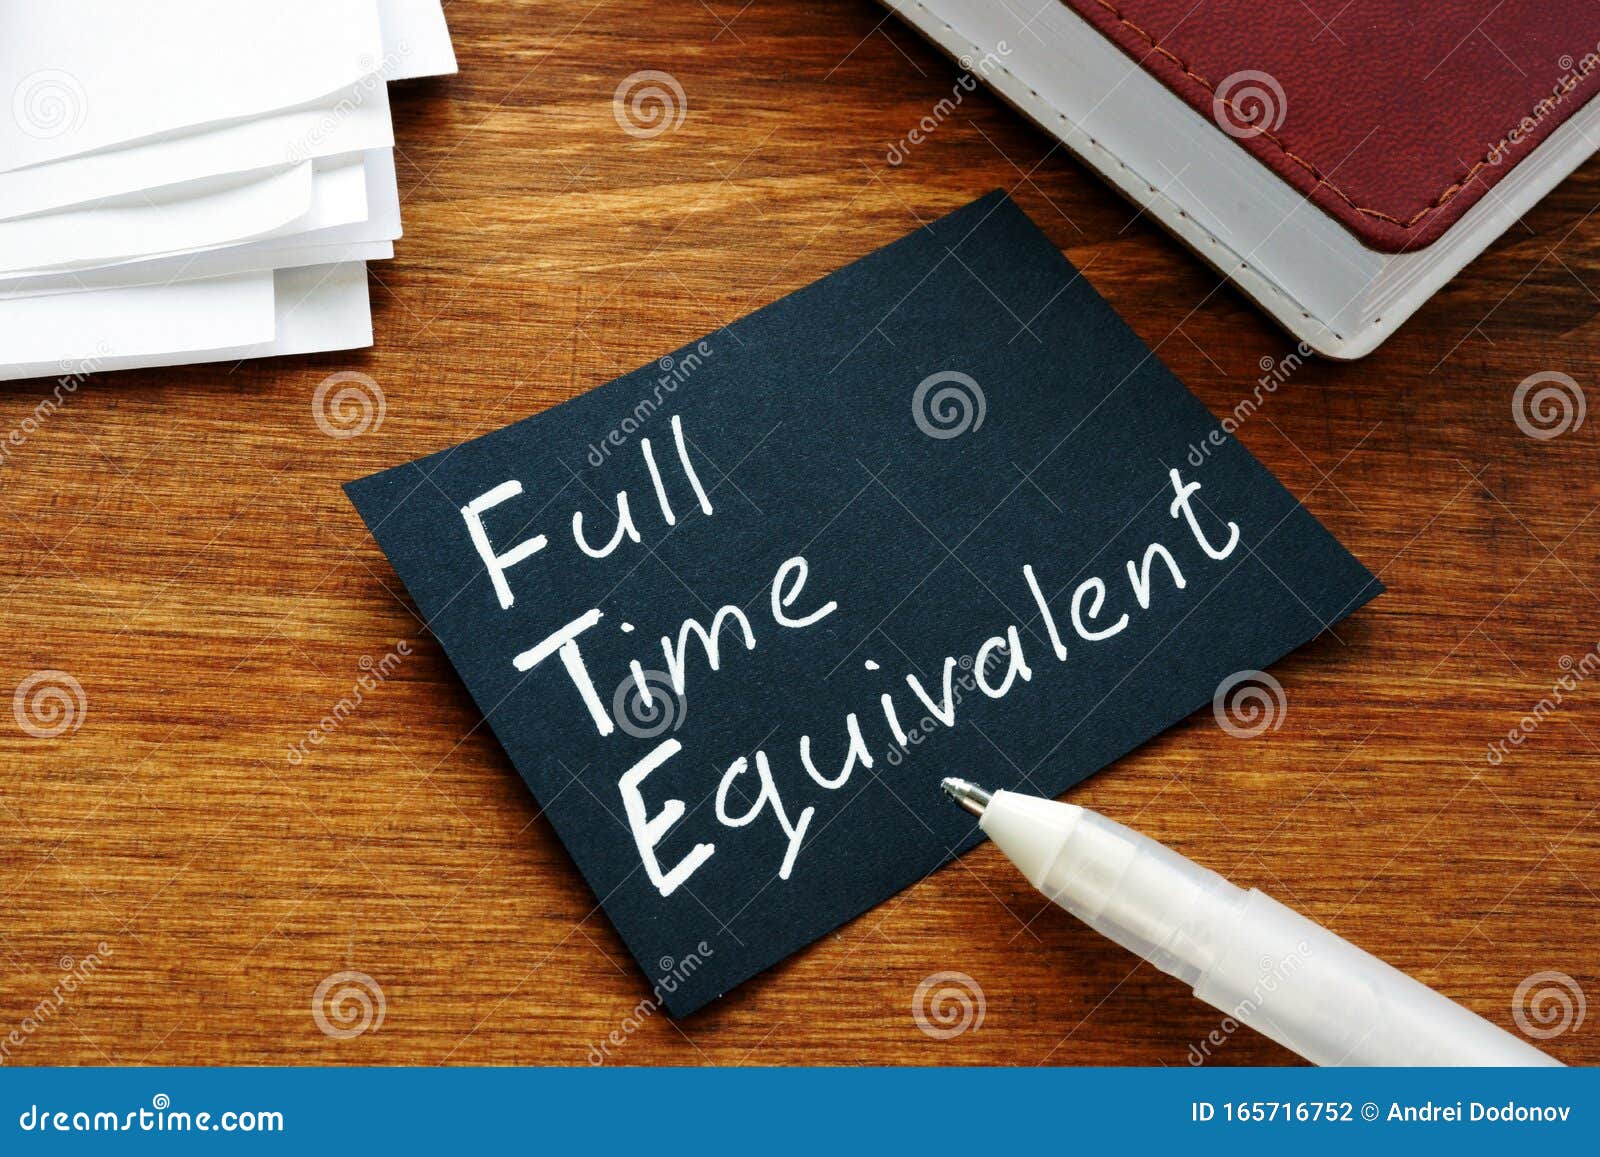 business photo shows printed text full time equivalent